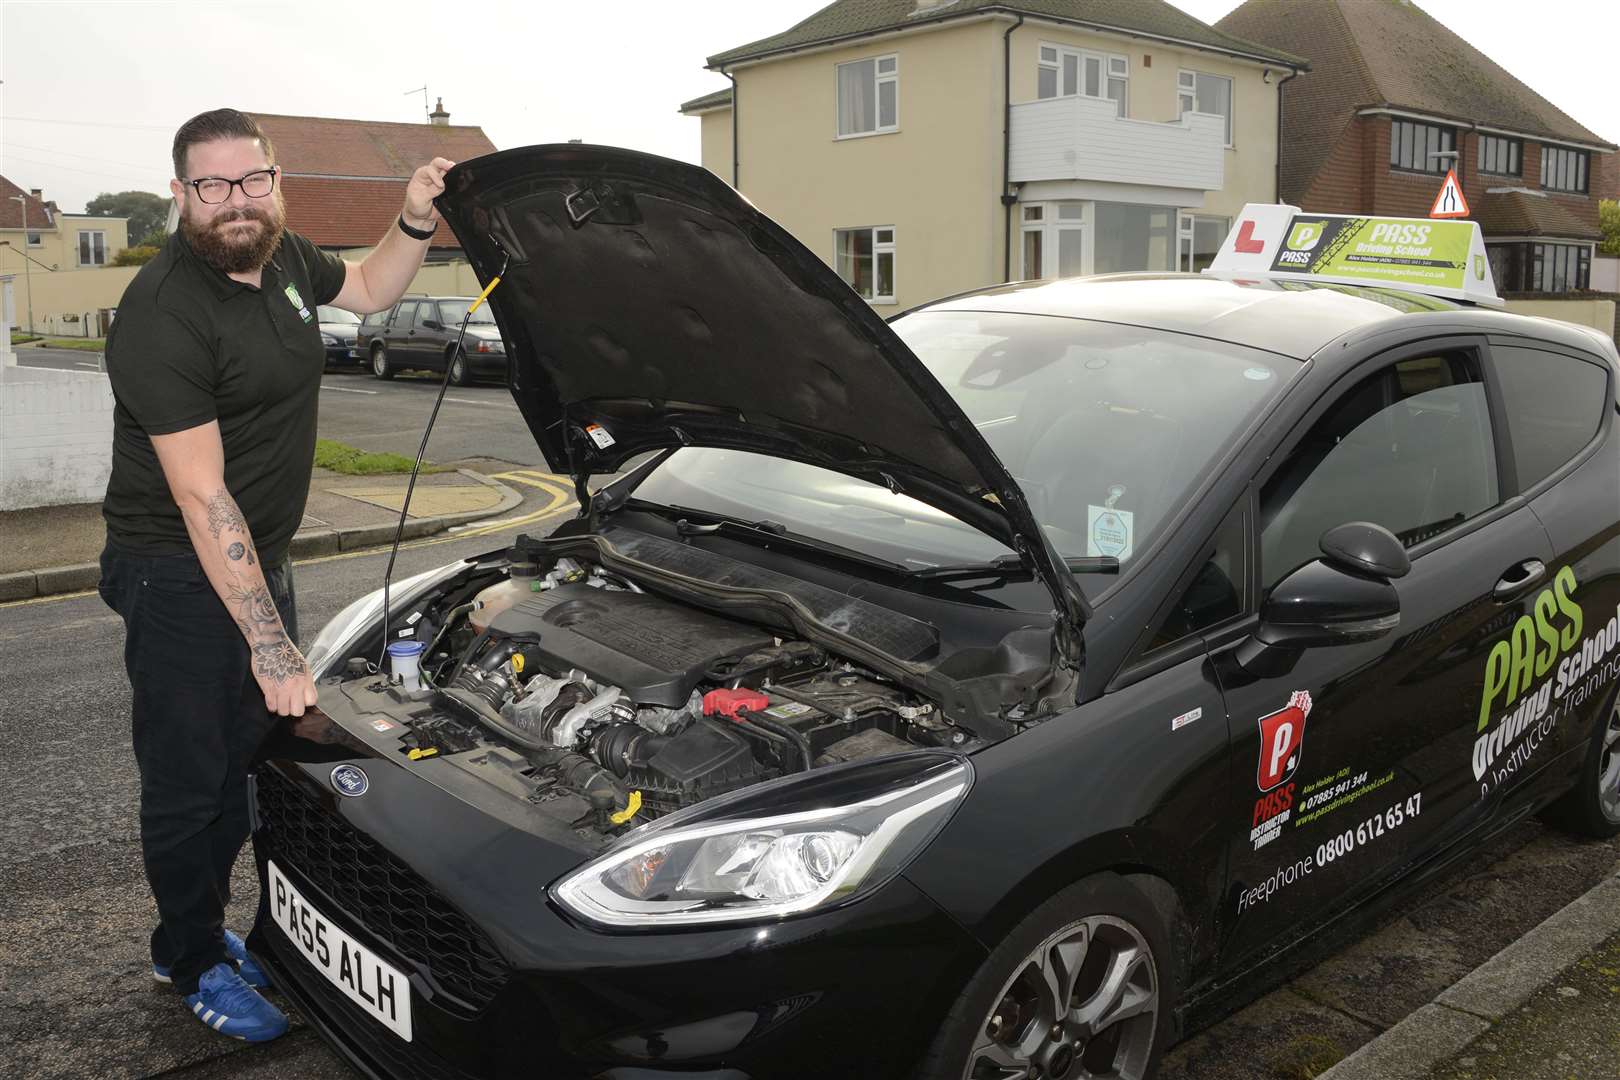 Alex Holder said the injured kitten got into the engine of his car. Picture: Paul Amos